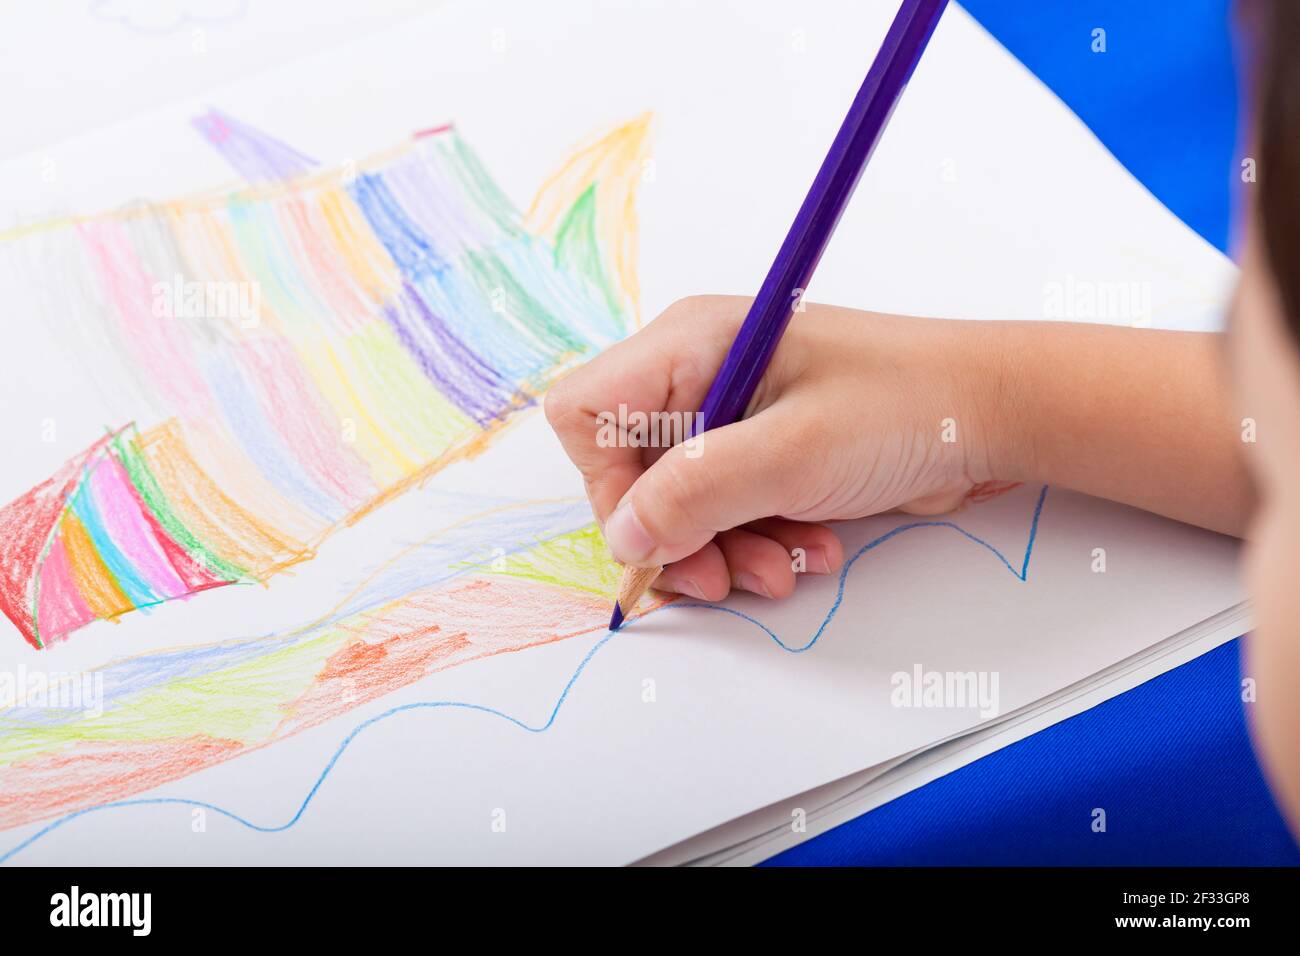 https://c8.alamy.com/comp/2F33GP8/hand-of-child-drawing-by-colour-pencil-education-concept-2F33GP8.jpg